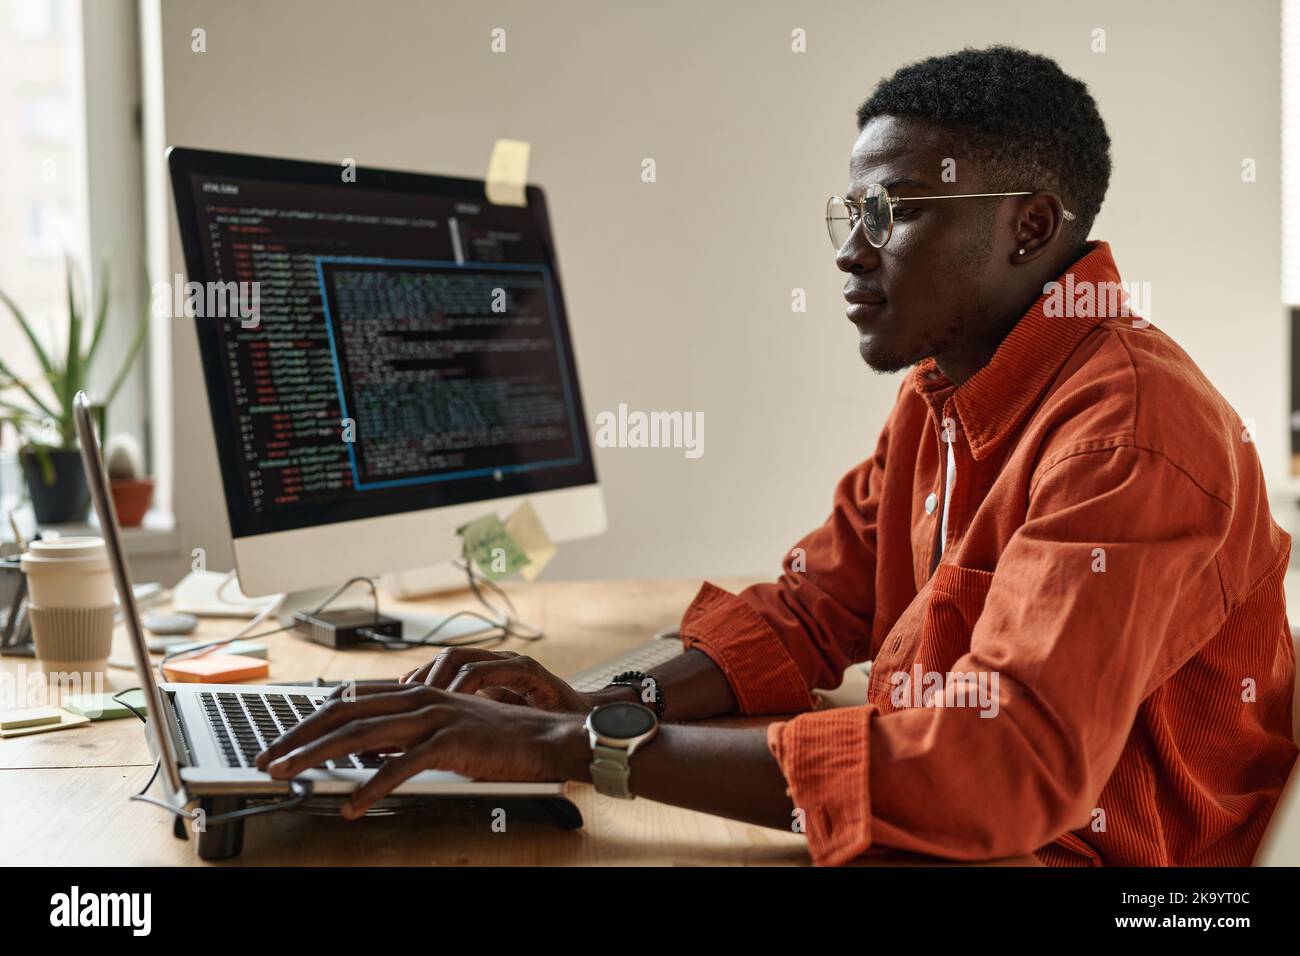 Side view of young black man in smart casualwear and eyeglasses decoding data while sitting by workplace in front of laptop Stock Photo